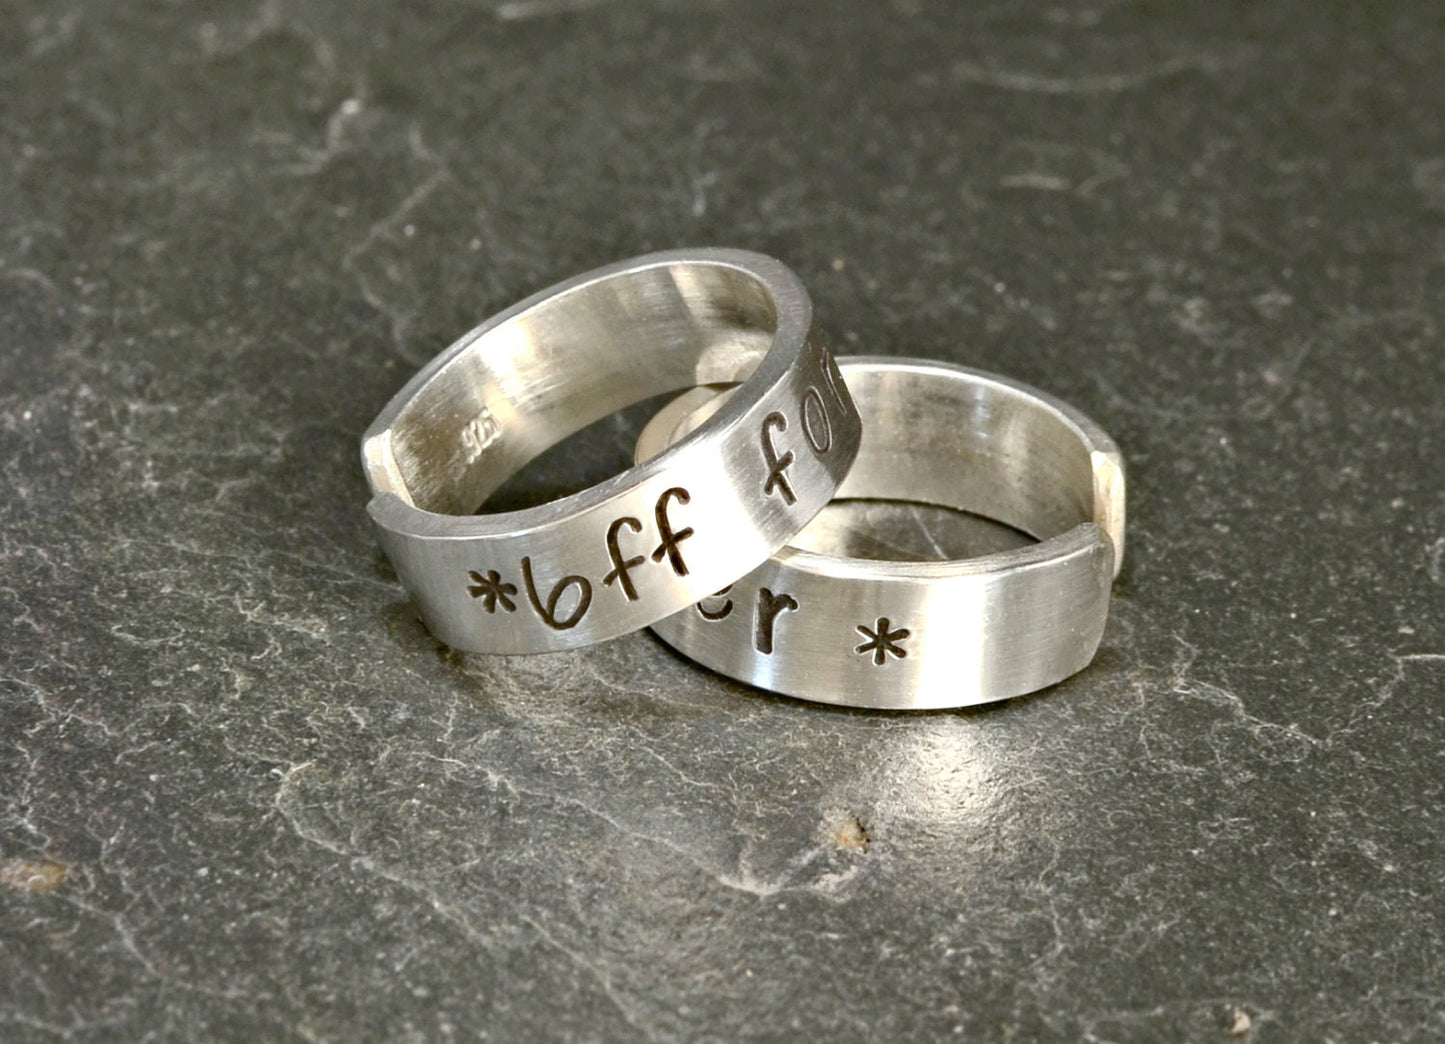 Best Friends Forever Sterling Silver Friendship Ring Set in adjustable open style